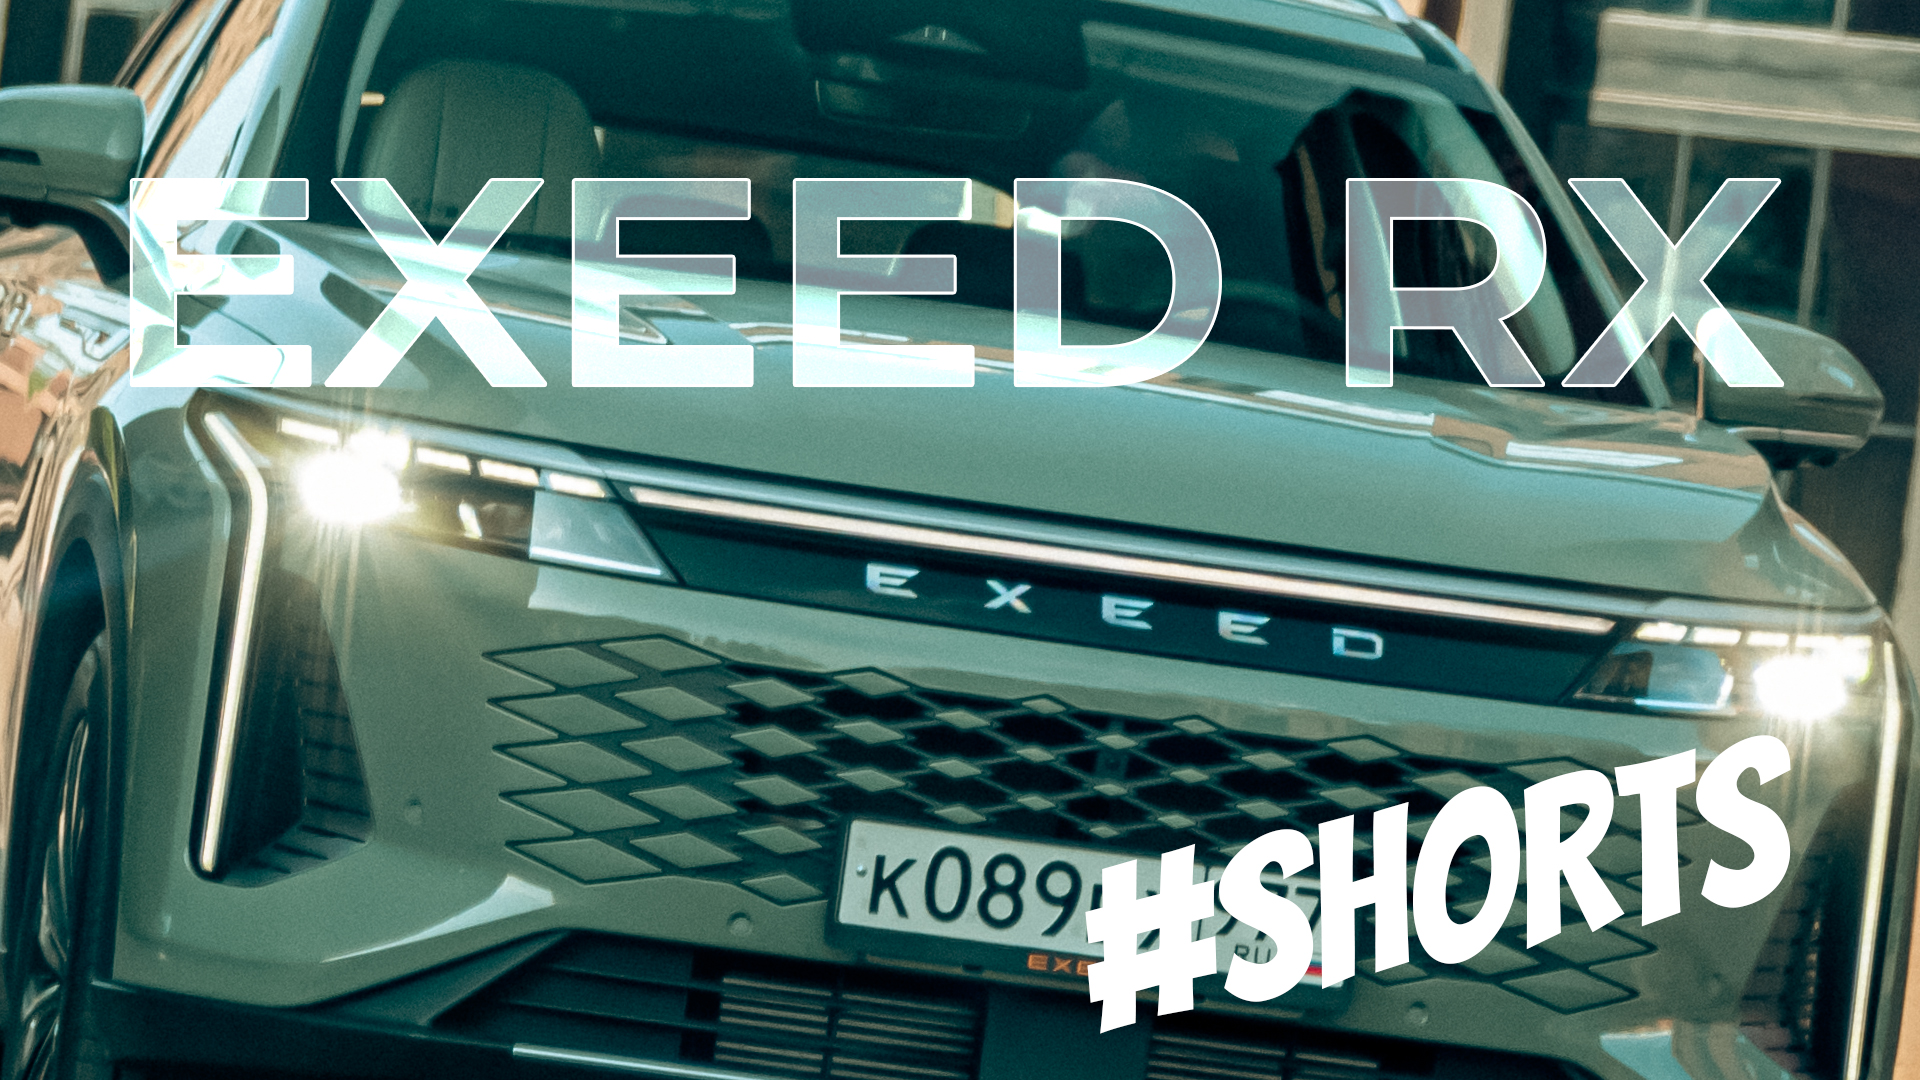 Exeed RX - Кайфовый? Думаю да.  #Exeed #RX #exeedrx